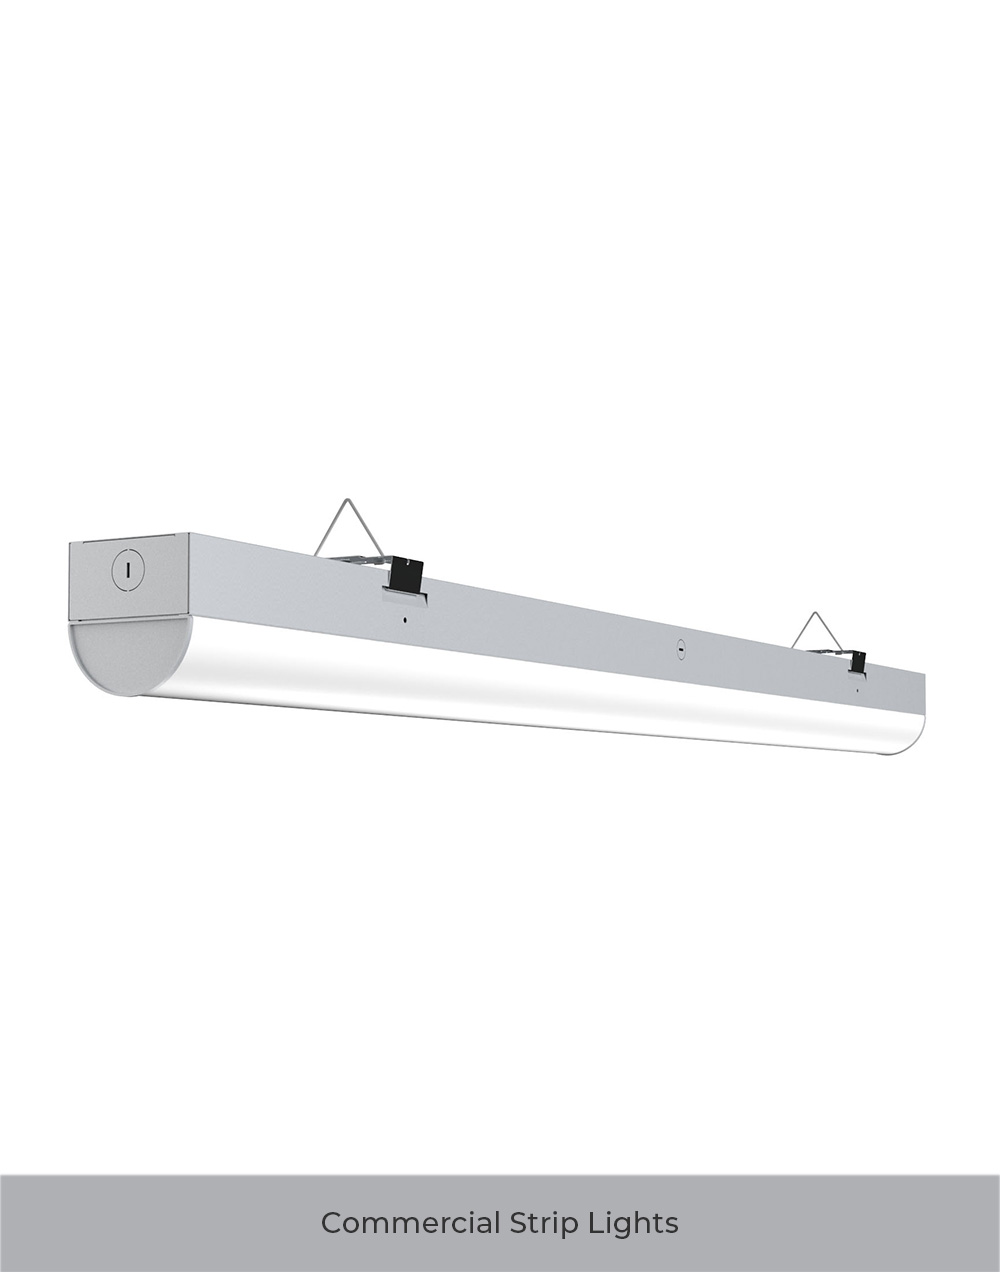 naturaLED Linear Commercial Strip Lights